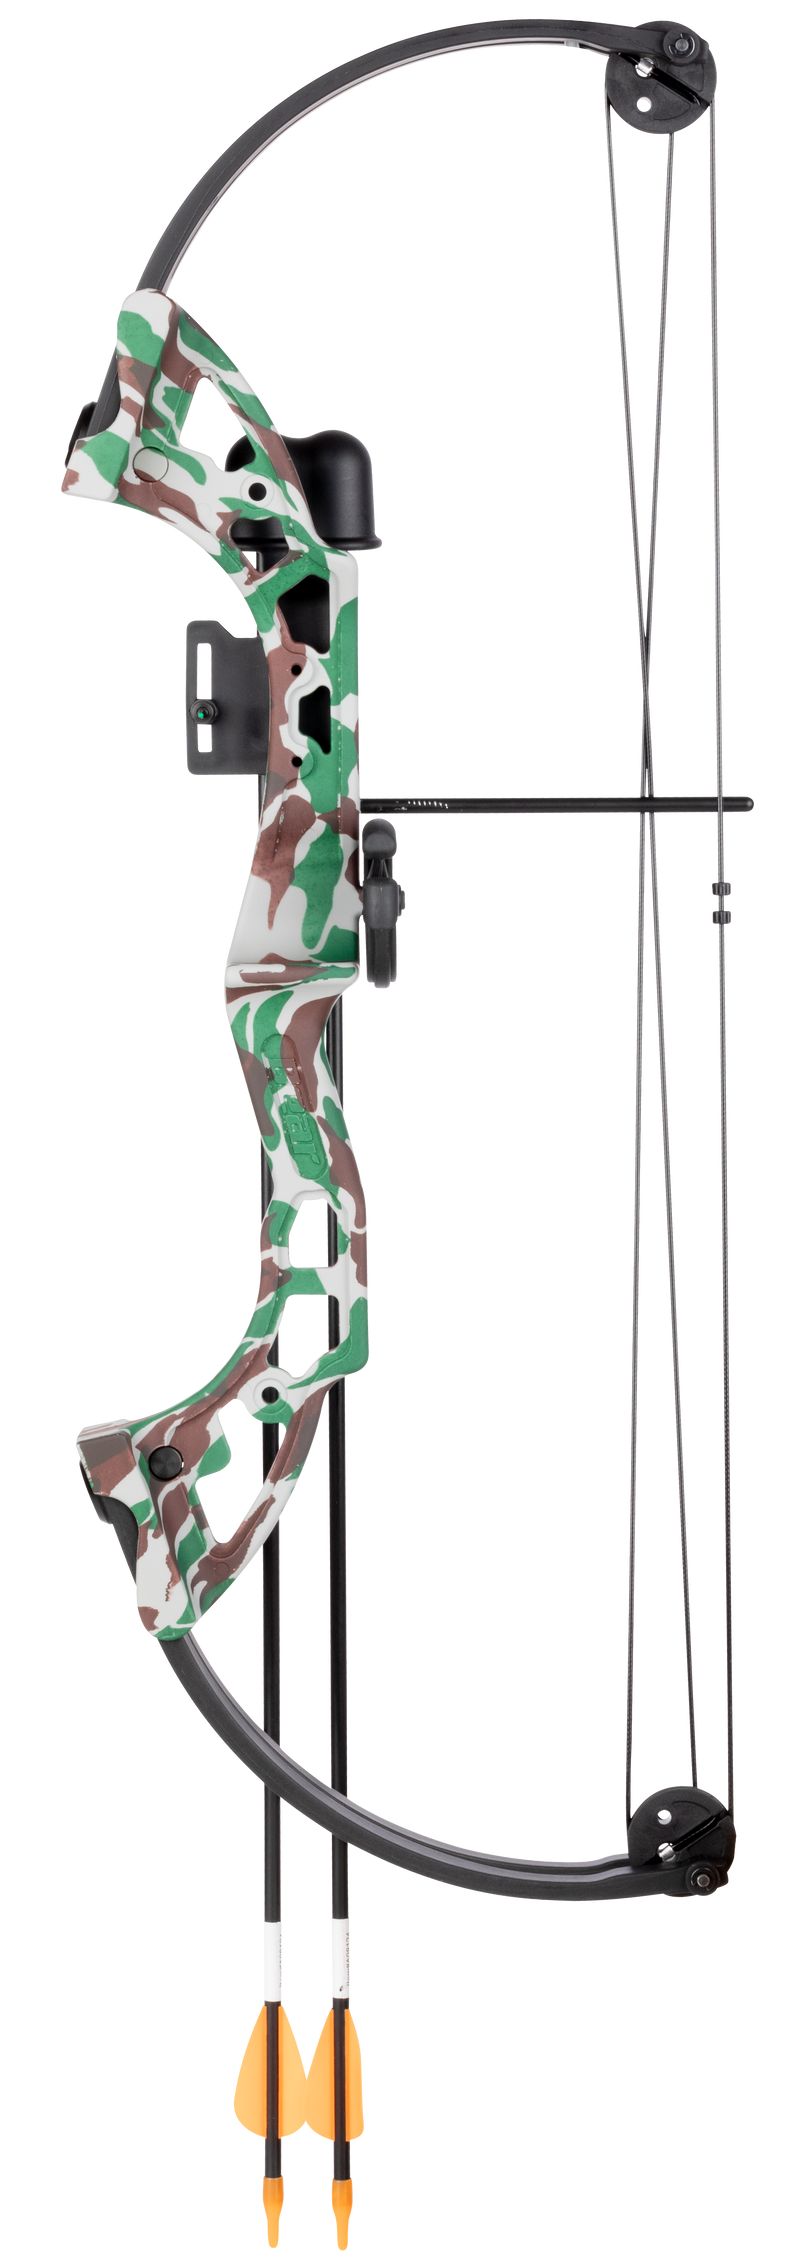 Bear Brave Bow with Biscuit - Camo Youth Compound Bow - Youth_2